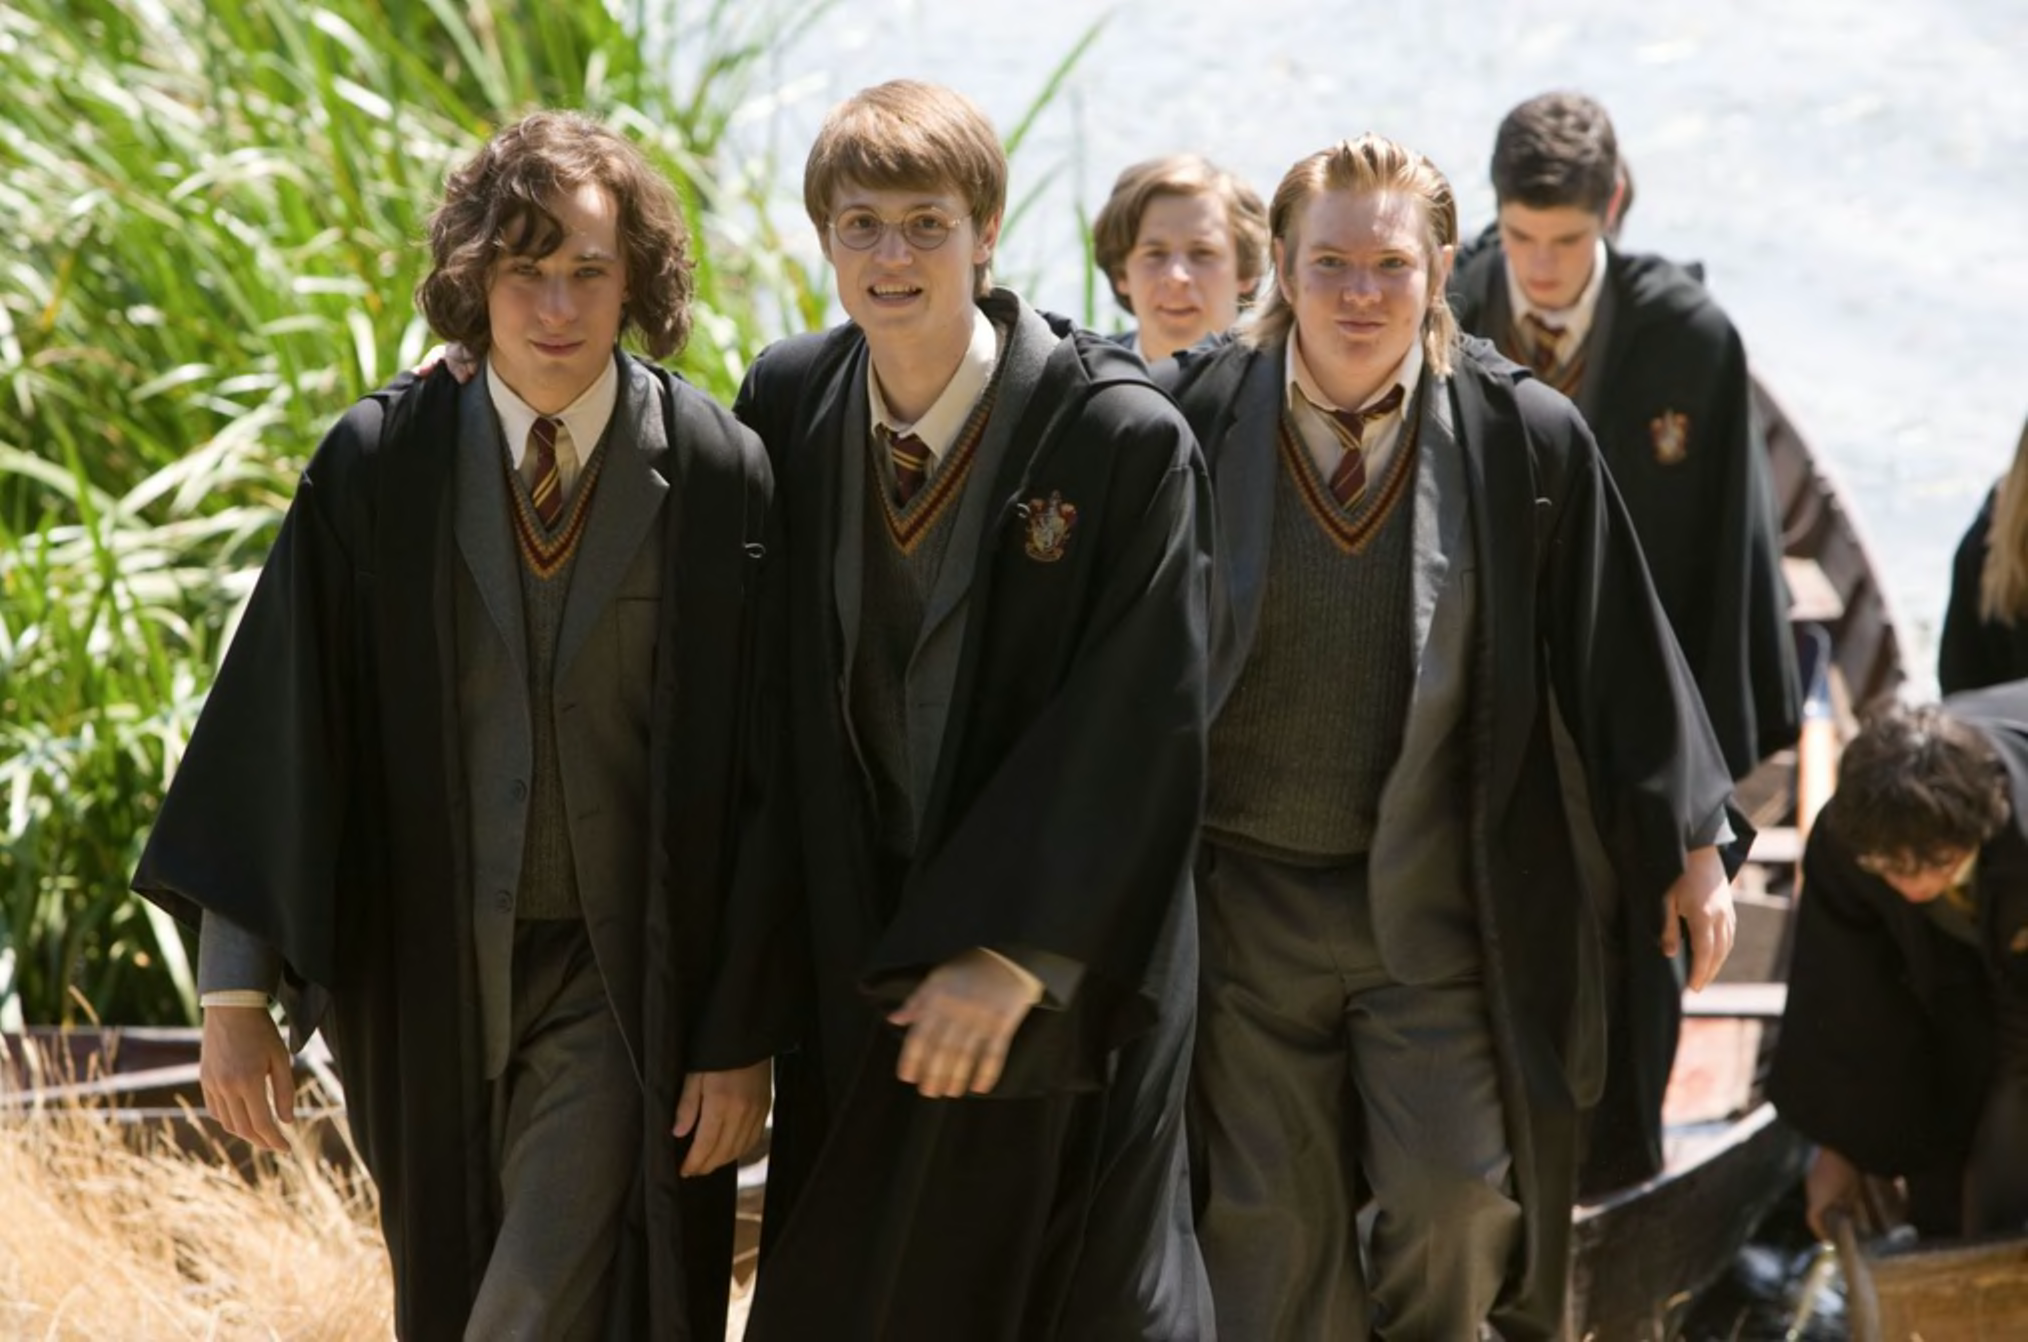 Harry Potter' Series, 'Game of Thrones' Spin-Off Announced for Max